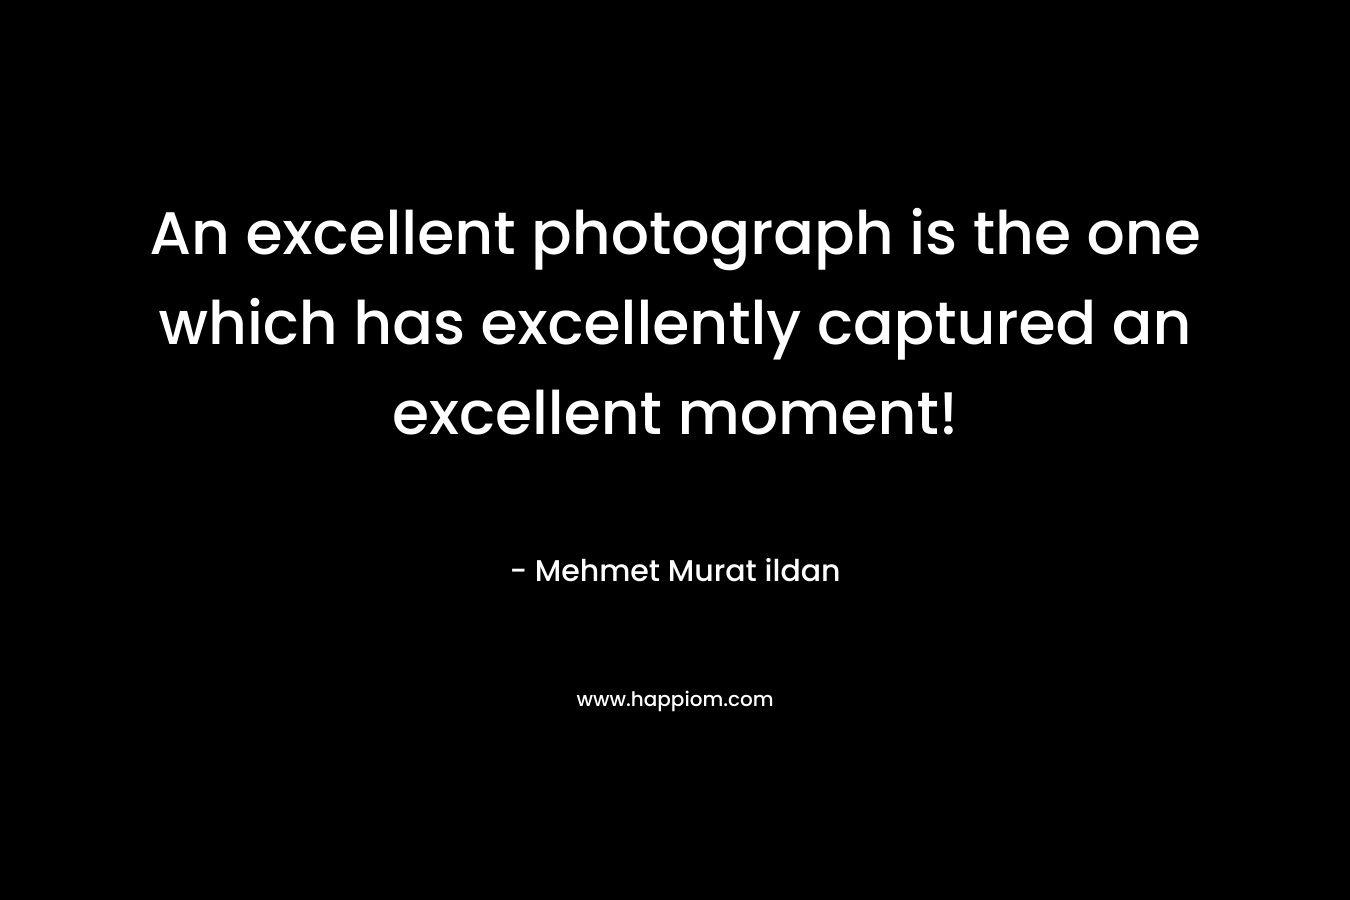 An excellent photograph is the one which has excellently captured an excellent moment! – Mehmet Murat ildan